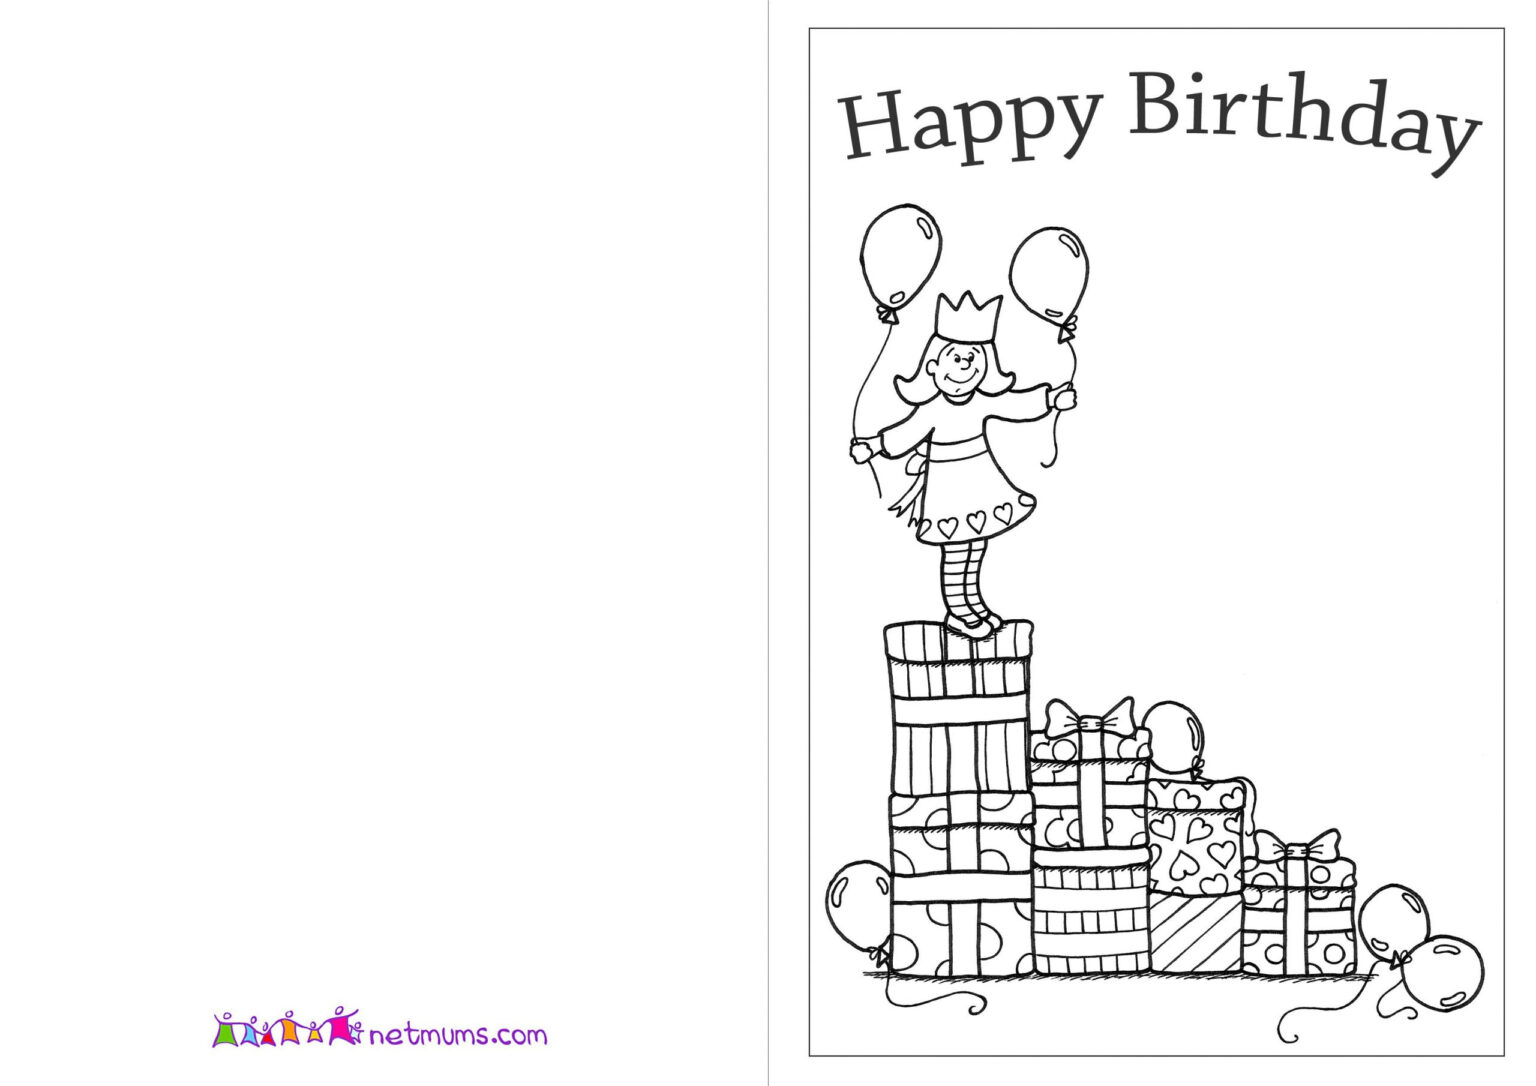 Coloring : Free Printable Coloring Birthday Card For Grandma In Mom ...